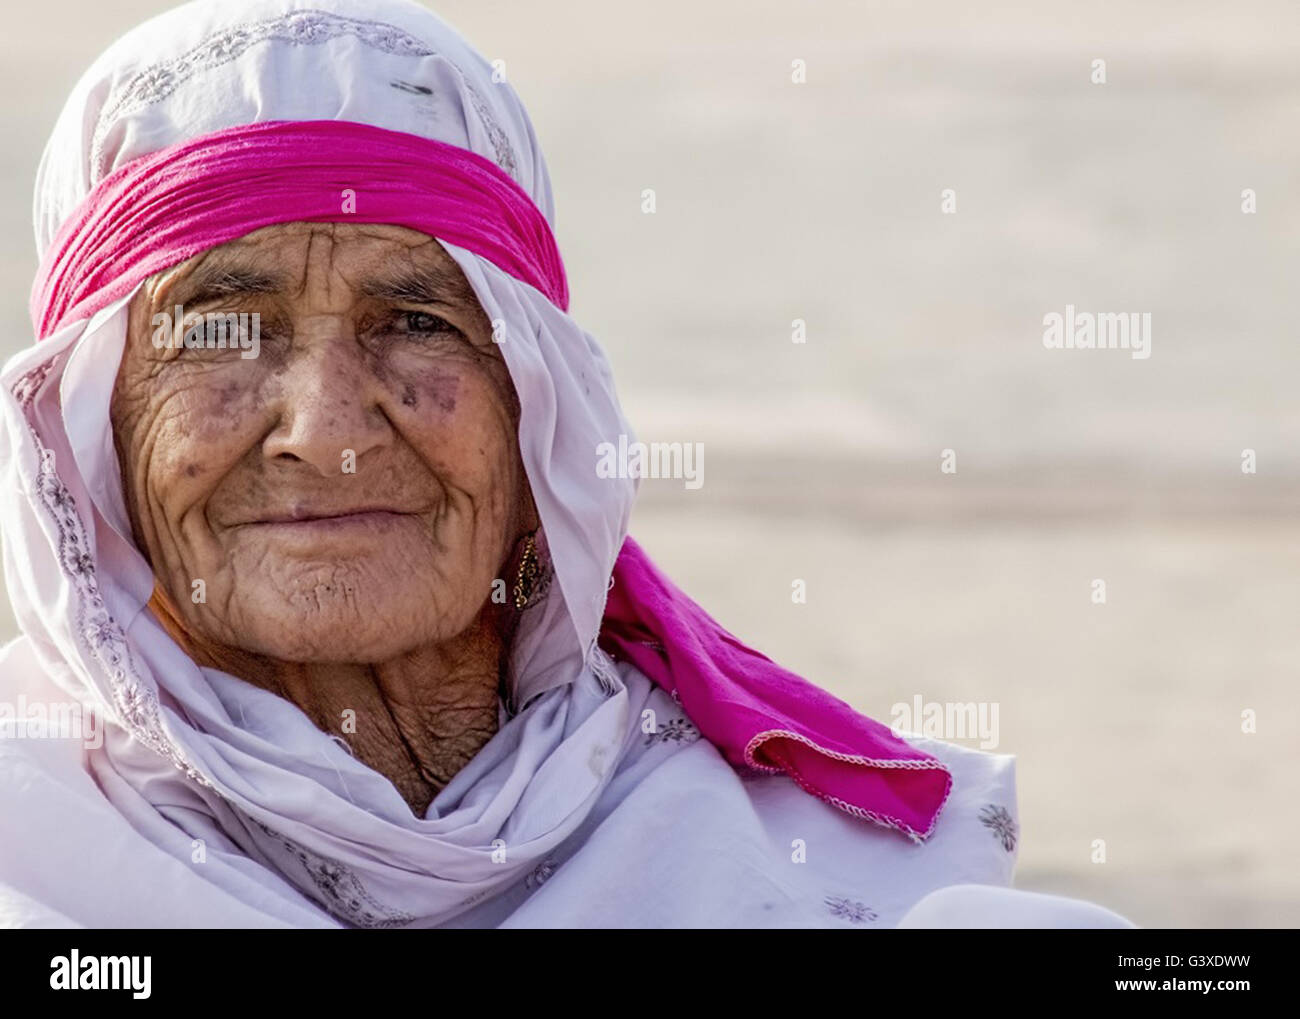 Elderly Arab woman wearing a white robe, scarf, and red head band. Stock Photo